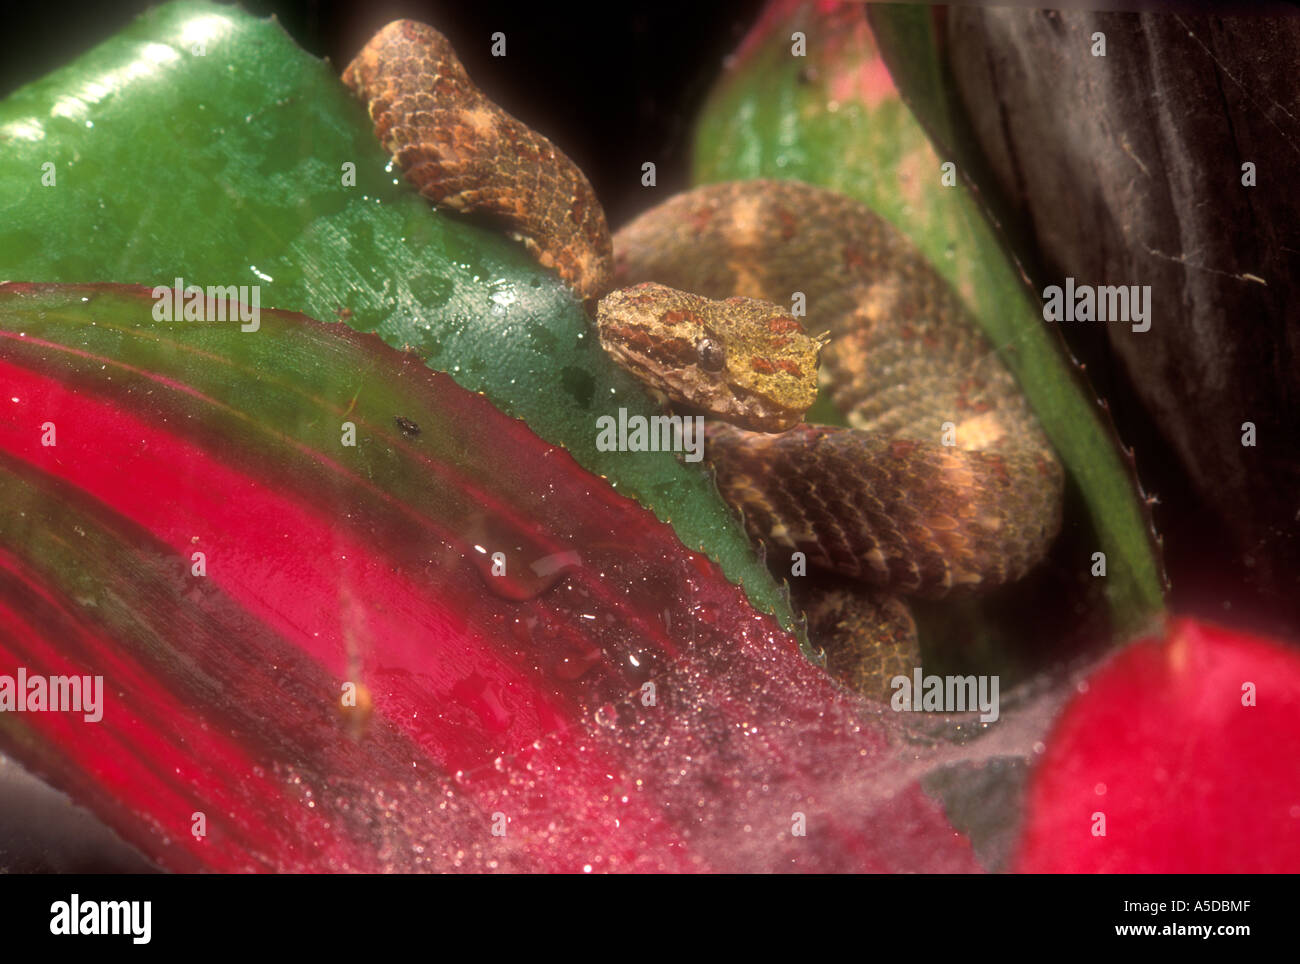 Eyelash palm pit viper (Bothriechis schlegelii) Posed in bromeliad with spider web. Stock Photo